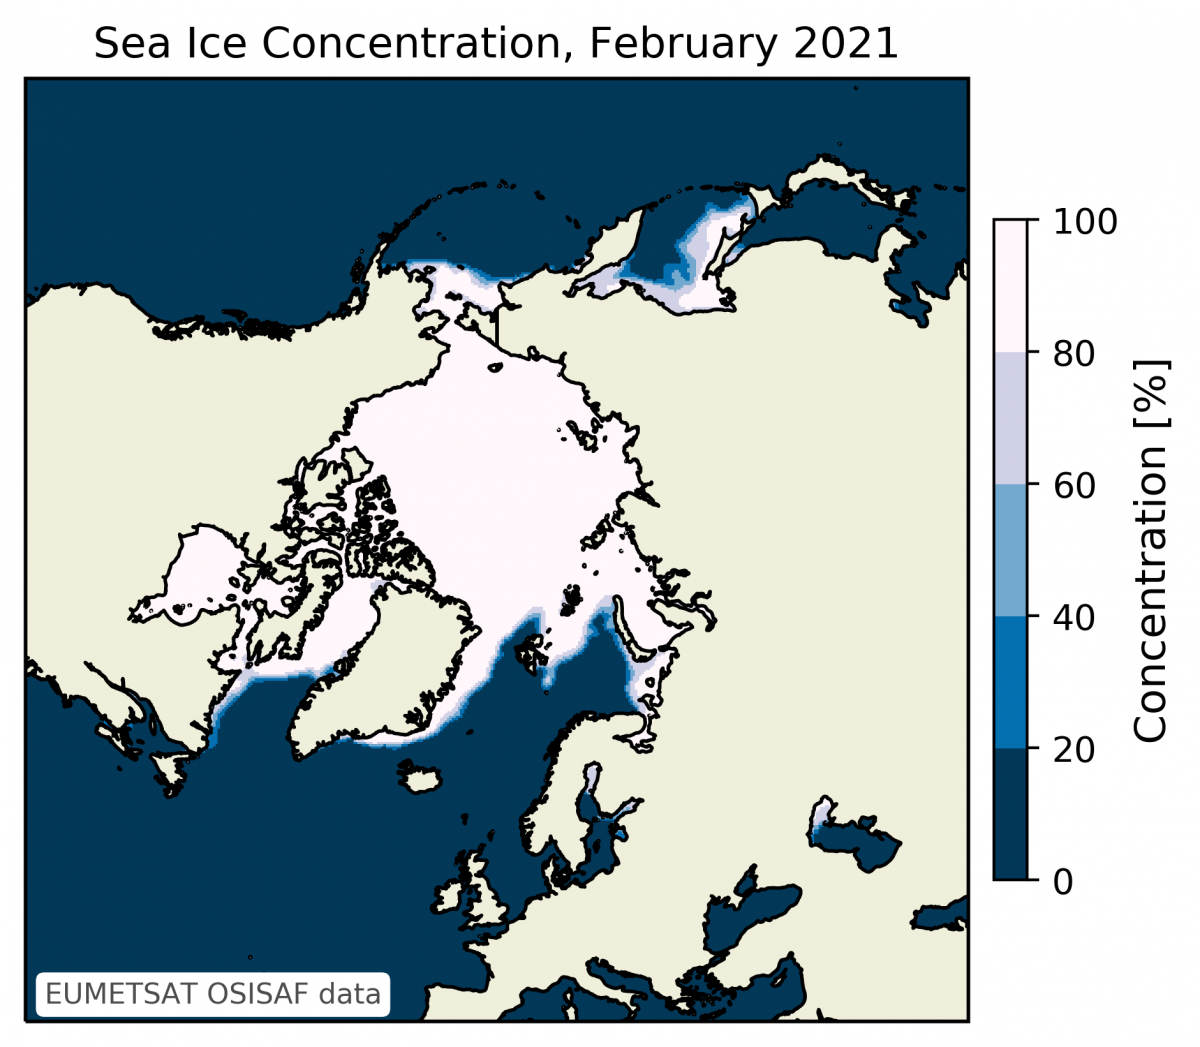 Arctic sea-ice concentration in February 2021